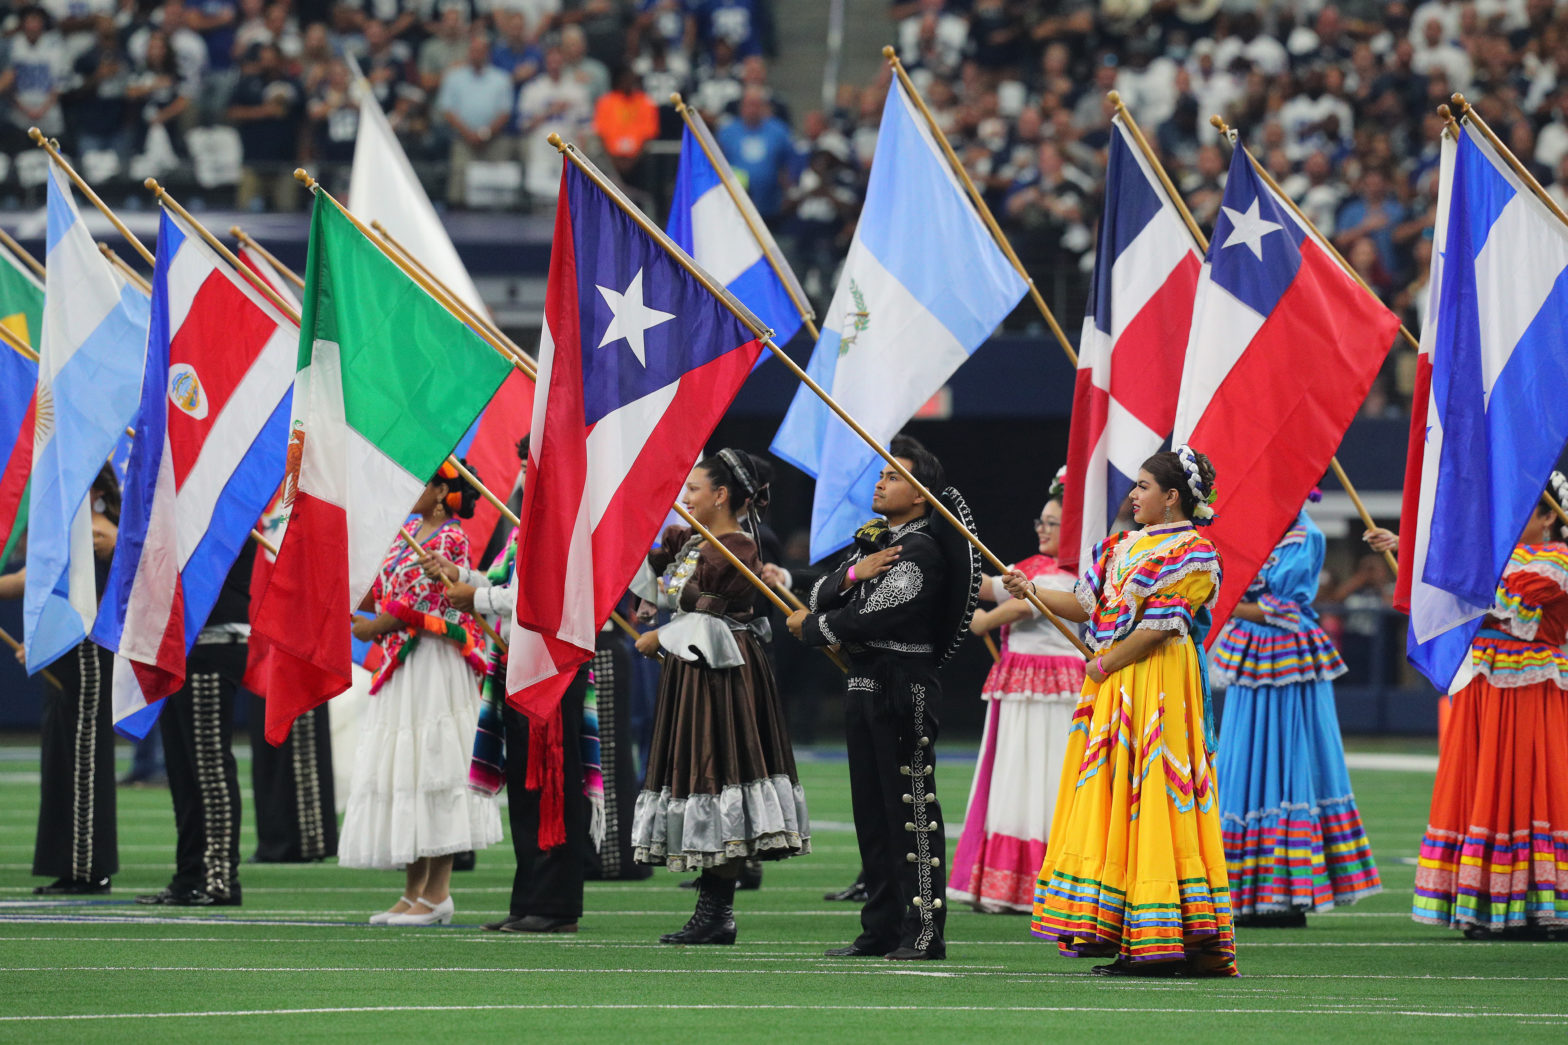 Celebrate Hispanic Heritage Month This Year By Heading To Fort Worth